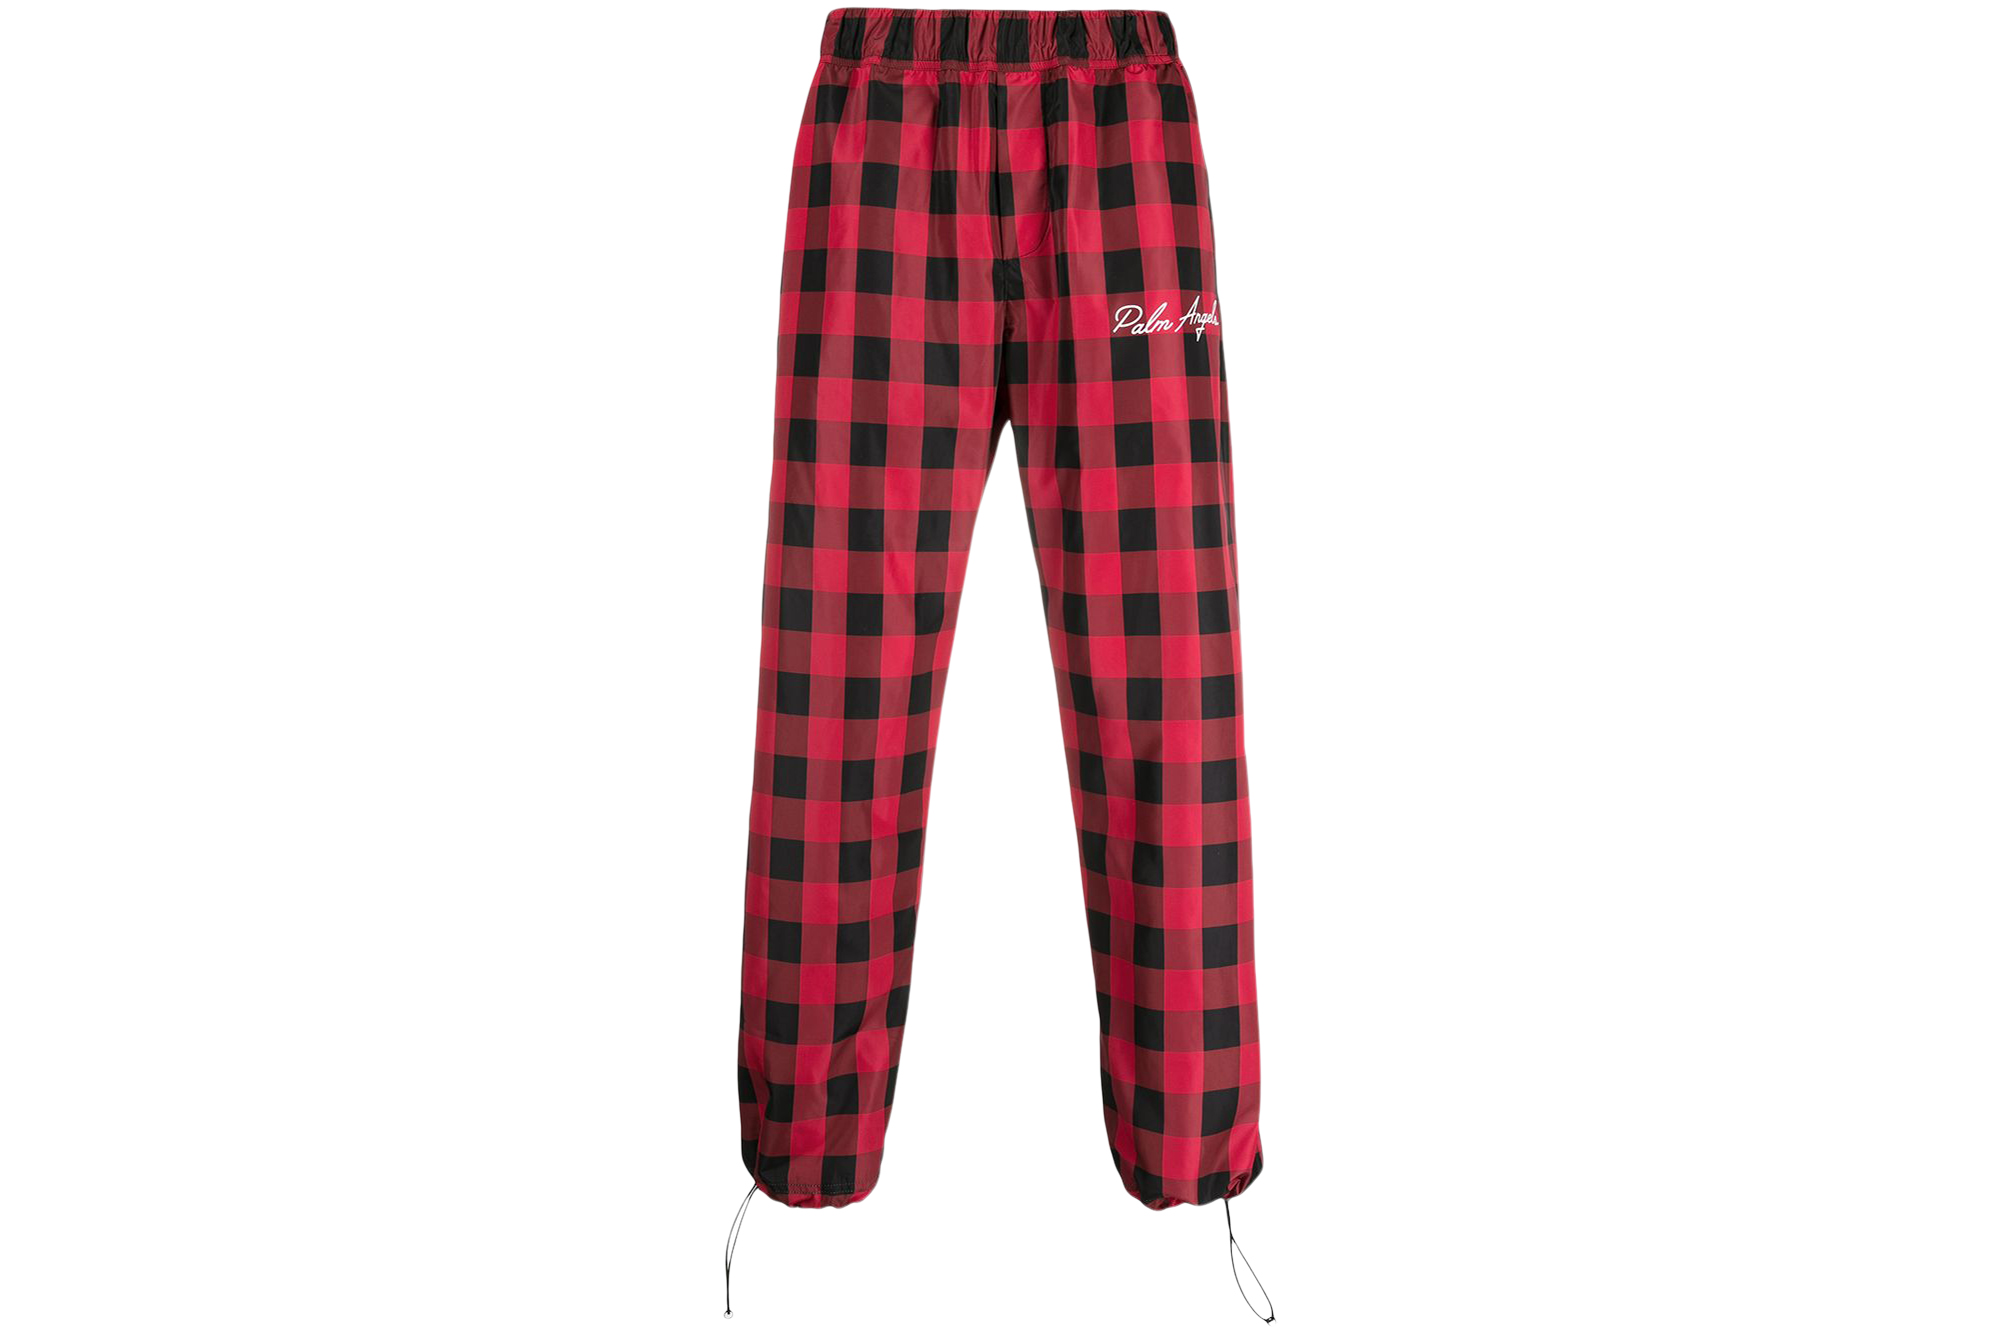 Italian Track Pants “Check” – Collie Anne